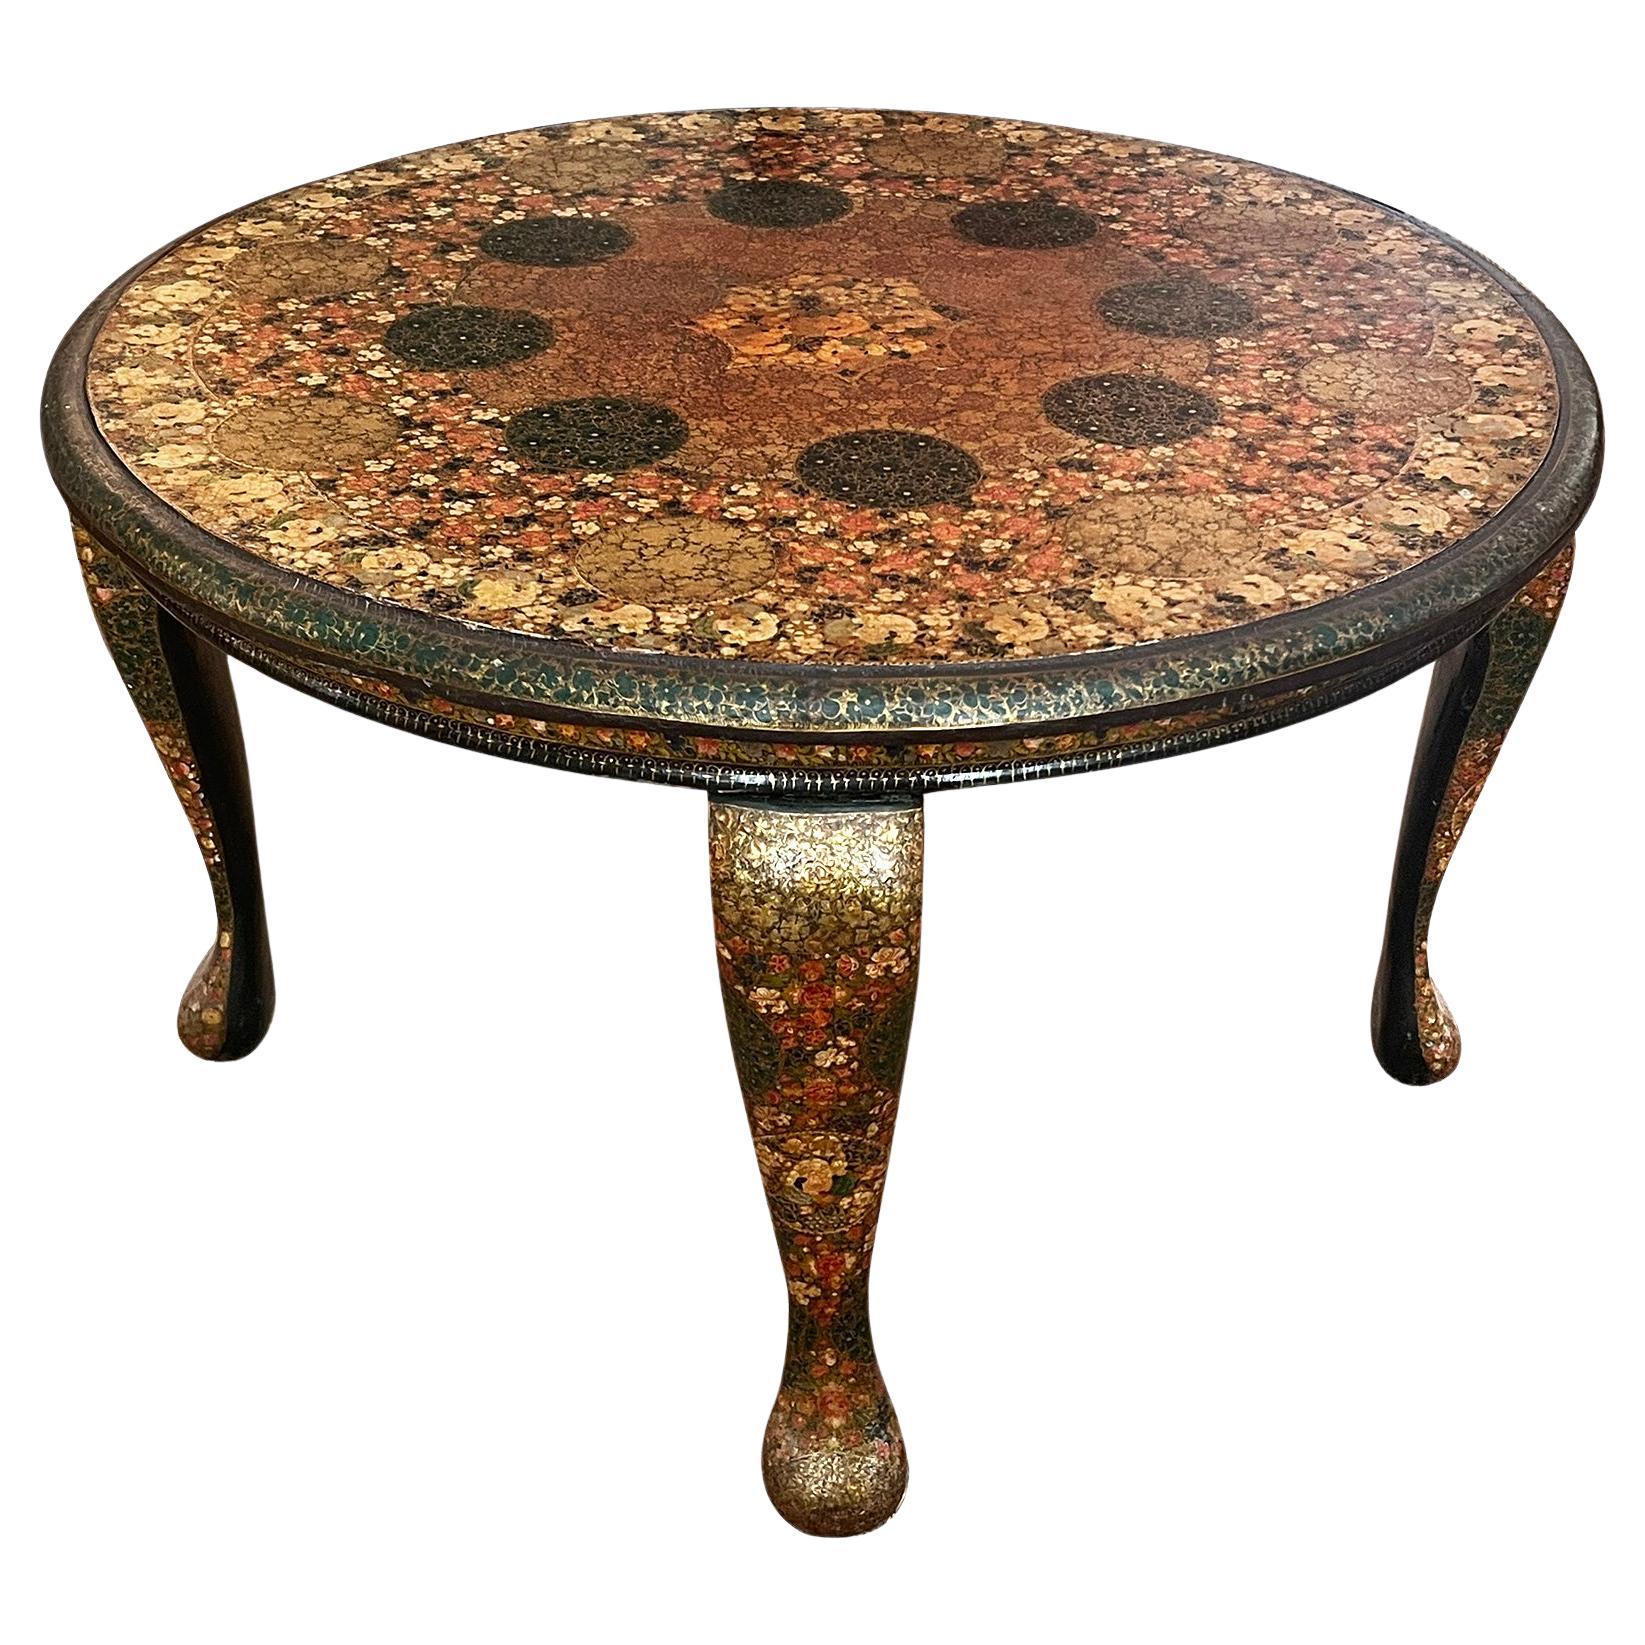 A Kashmir Lacquered Wood Circular Low/Coffee Table For Sale